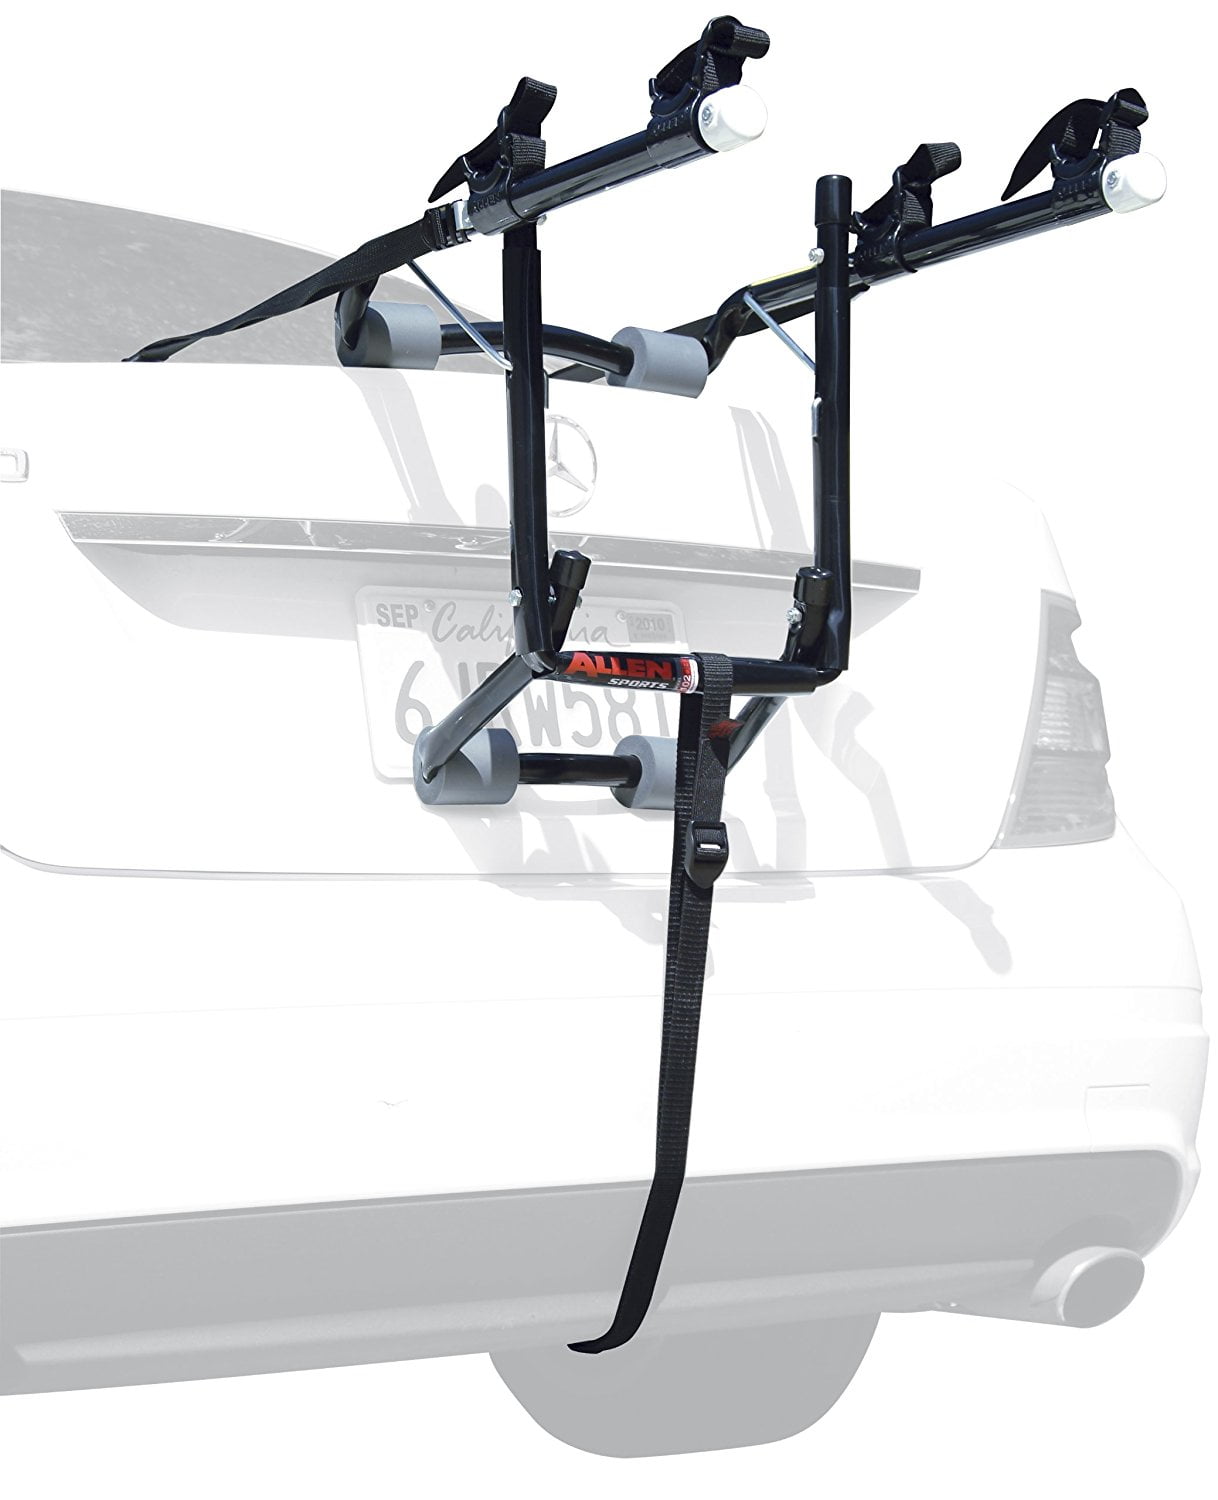 Allen Sports Deluxe 2 Bicycle Trunk Mounted Bike Rack Carrier 102dn for sale online 